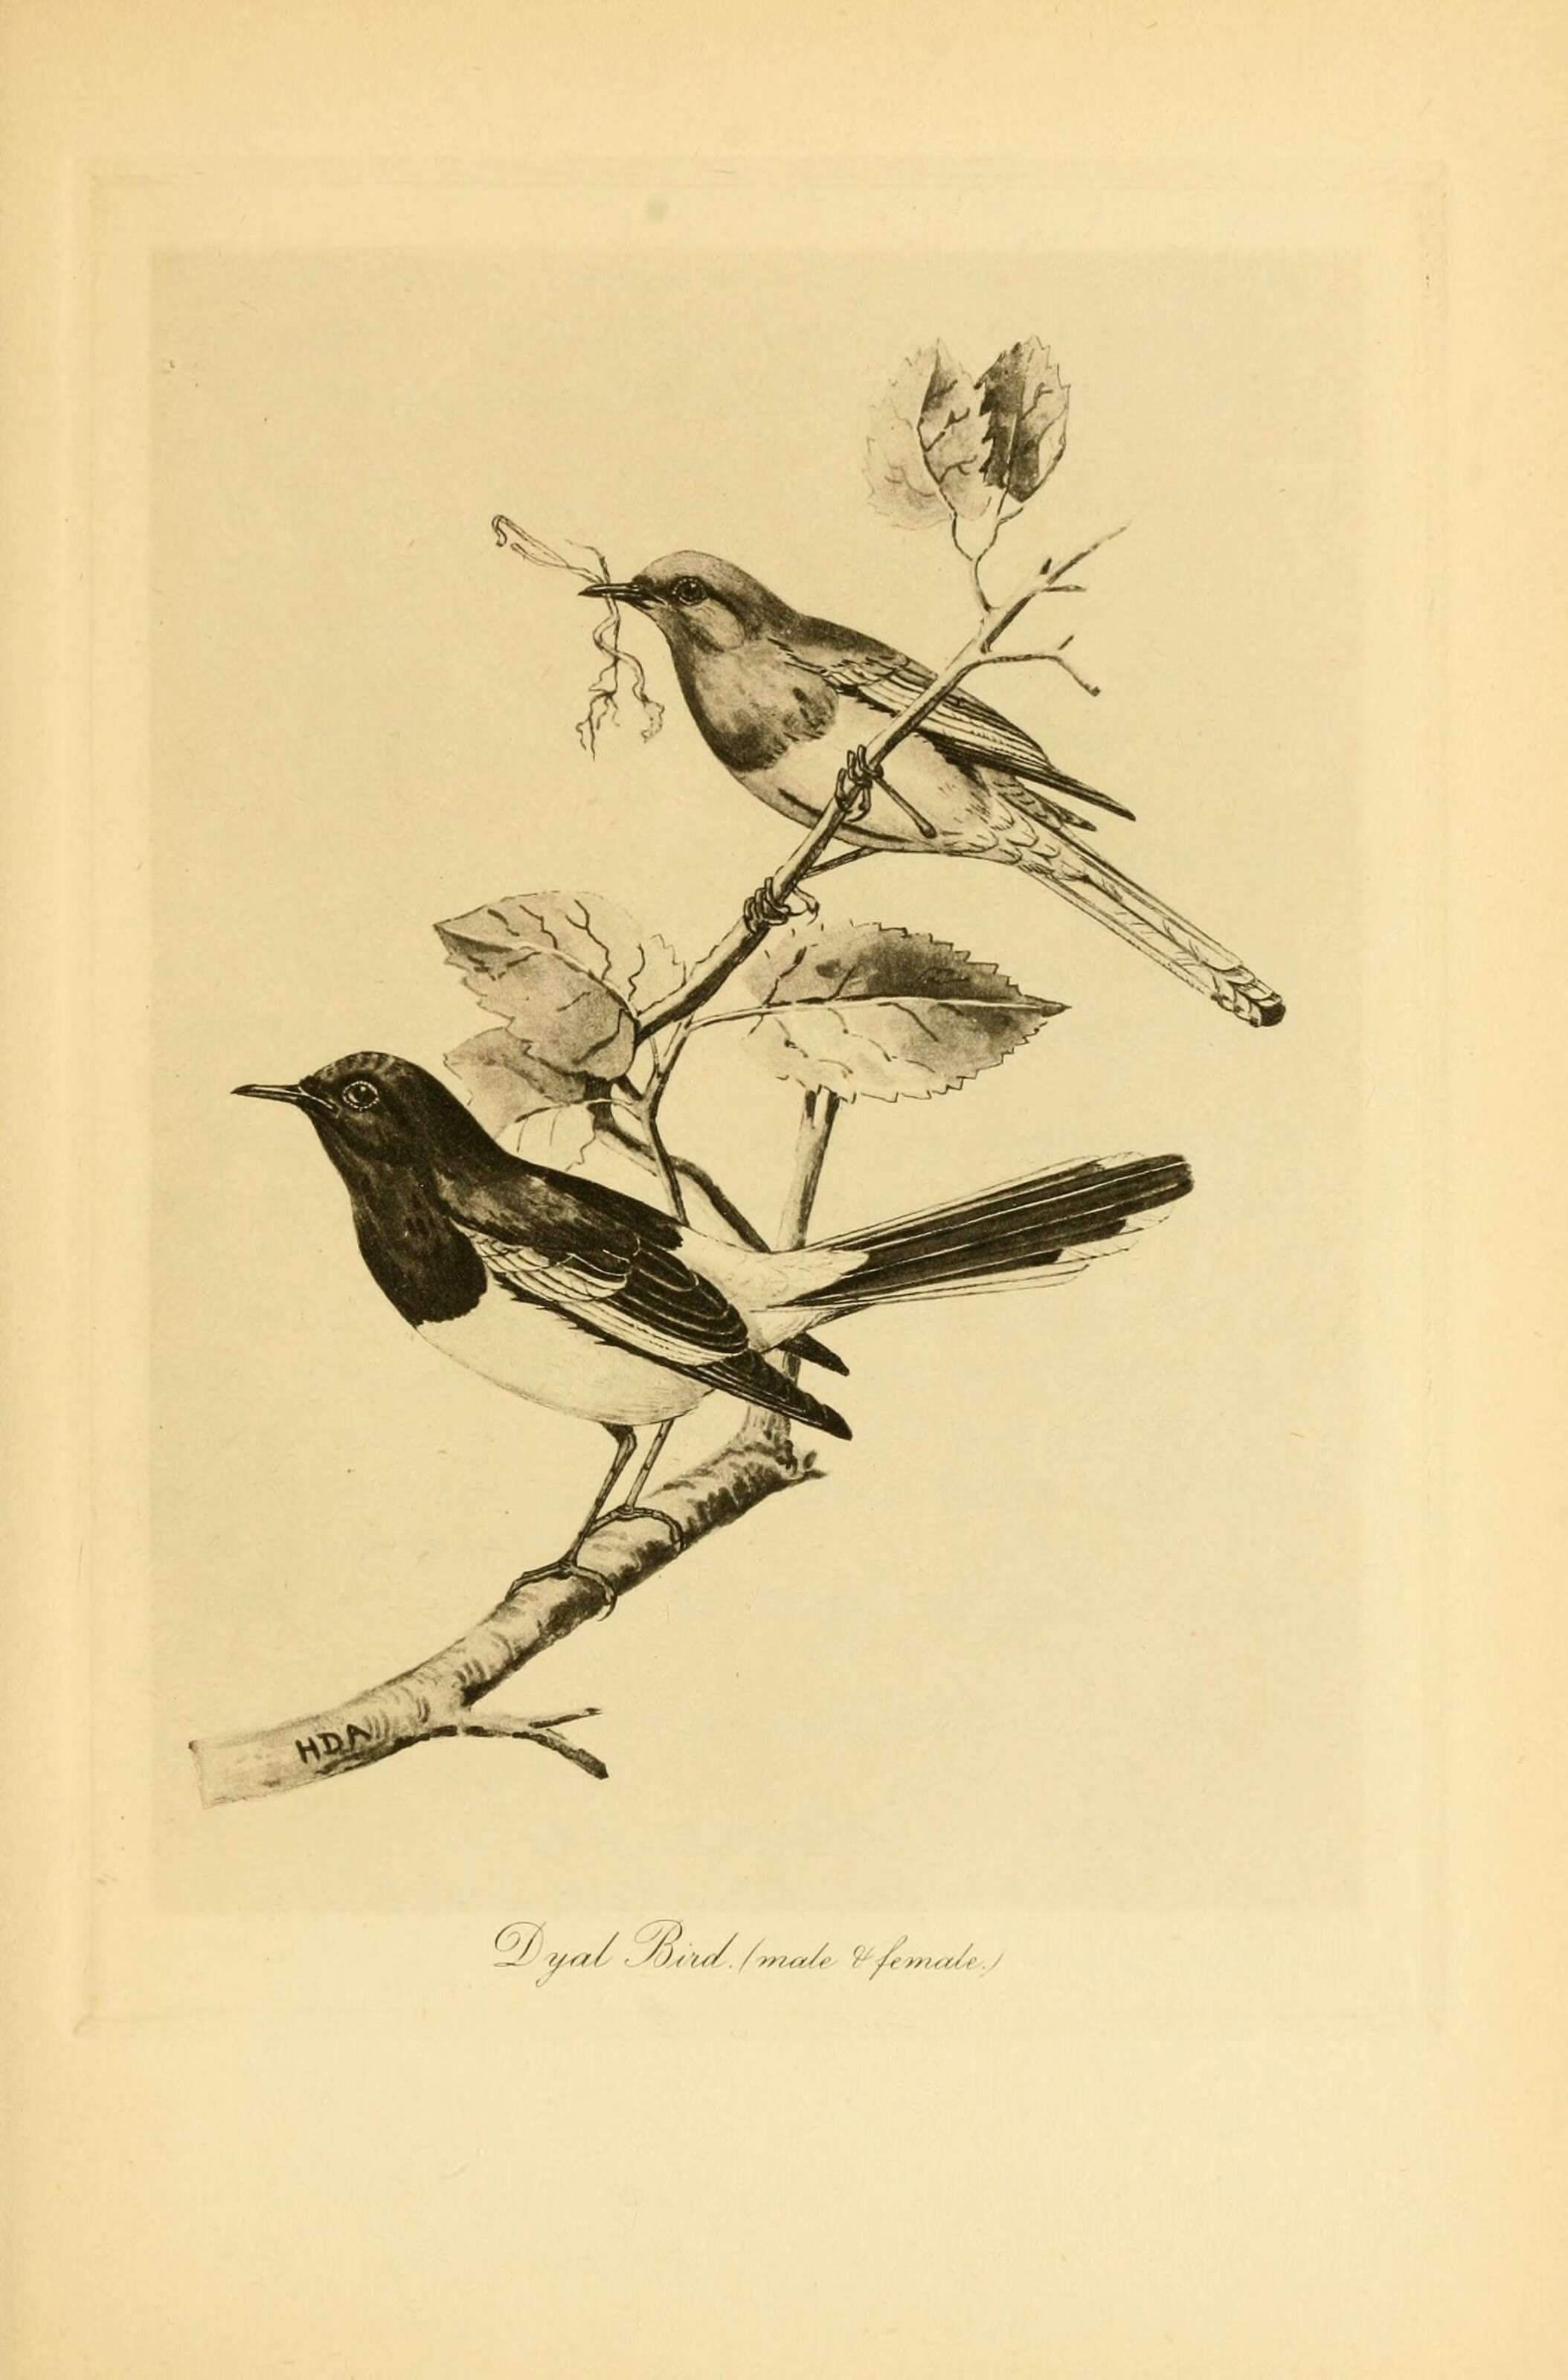 Image of Oriental Magpie Robin